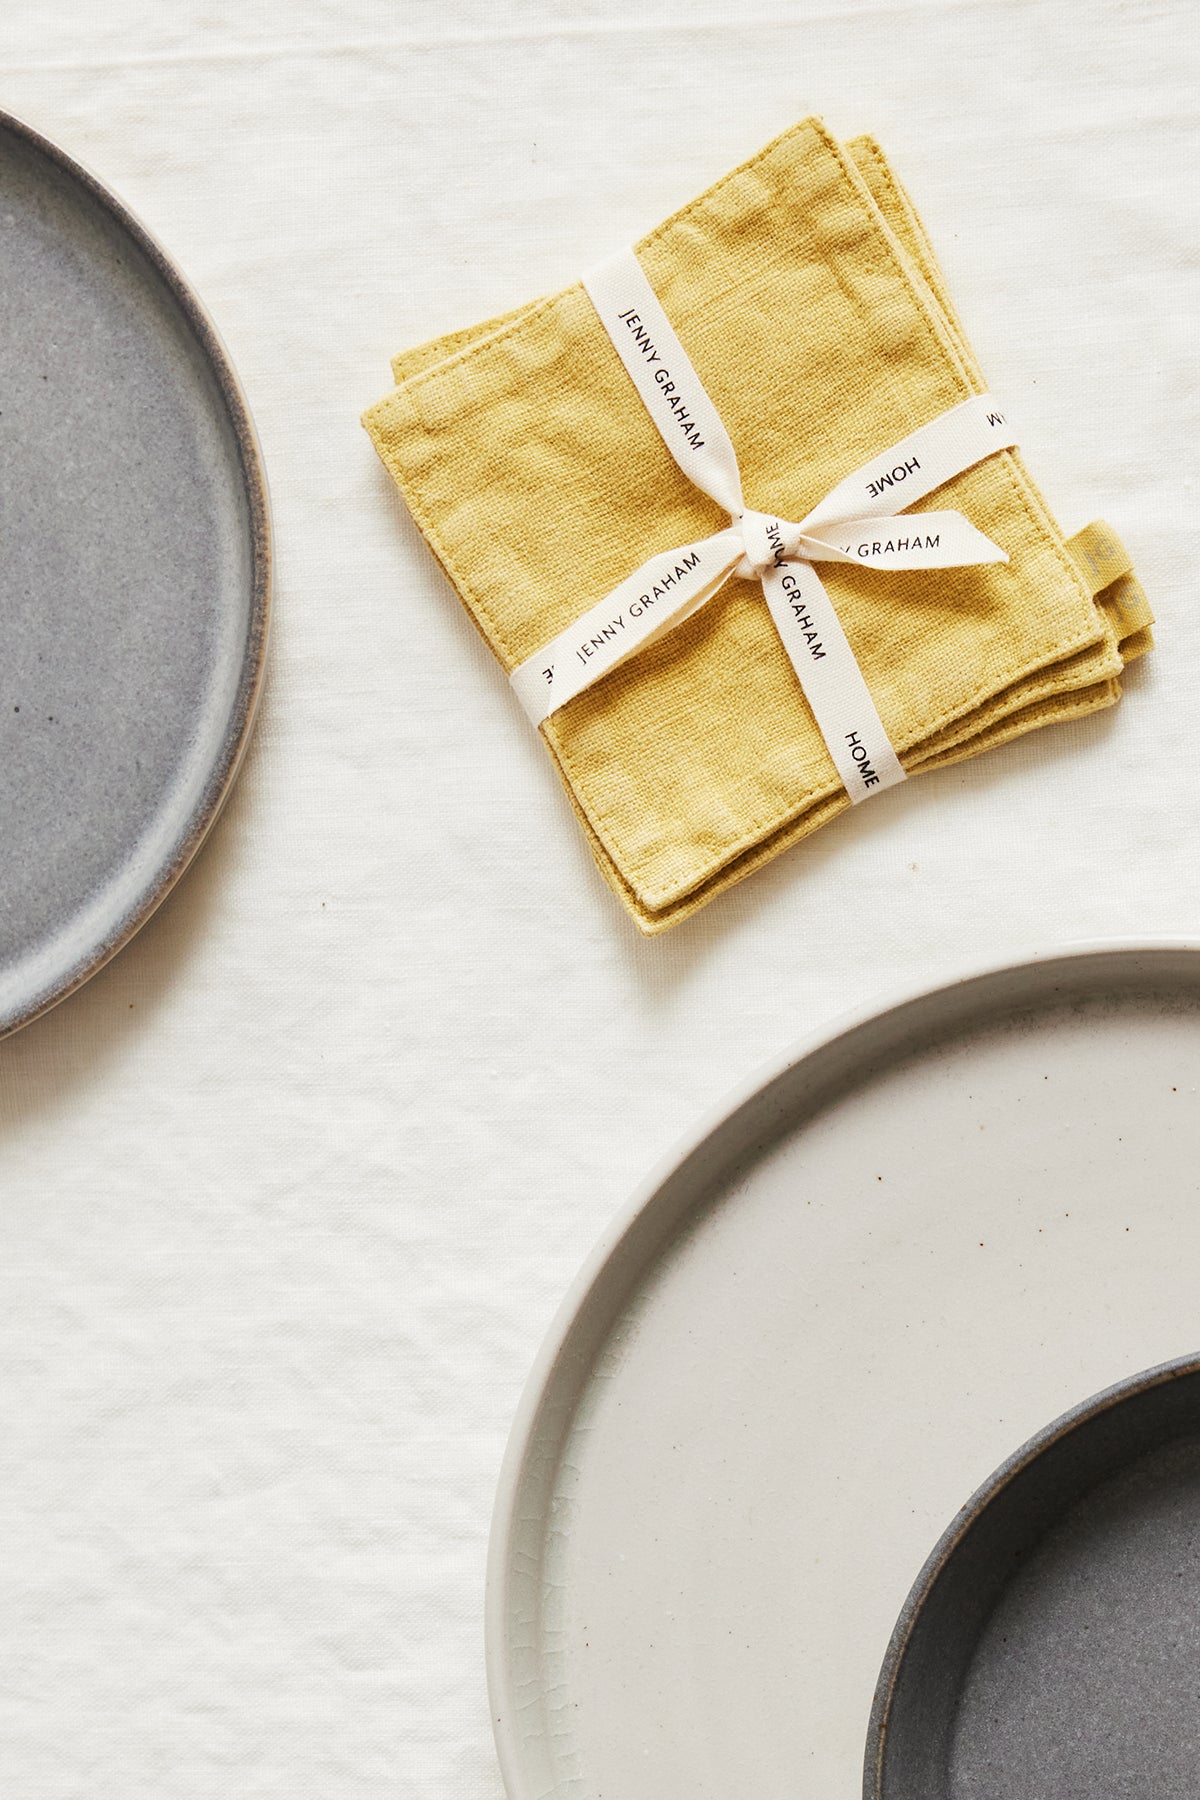 A set of Jenny Graham Home linen coasters (set of 4) on a white surface.-25629320413377